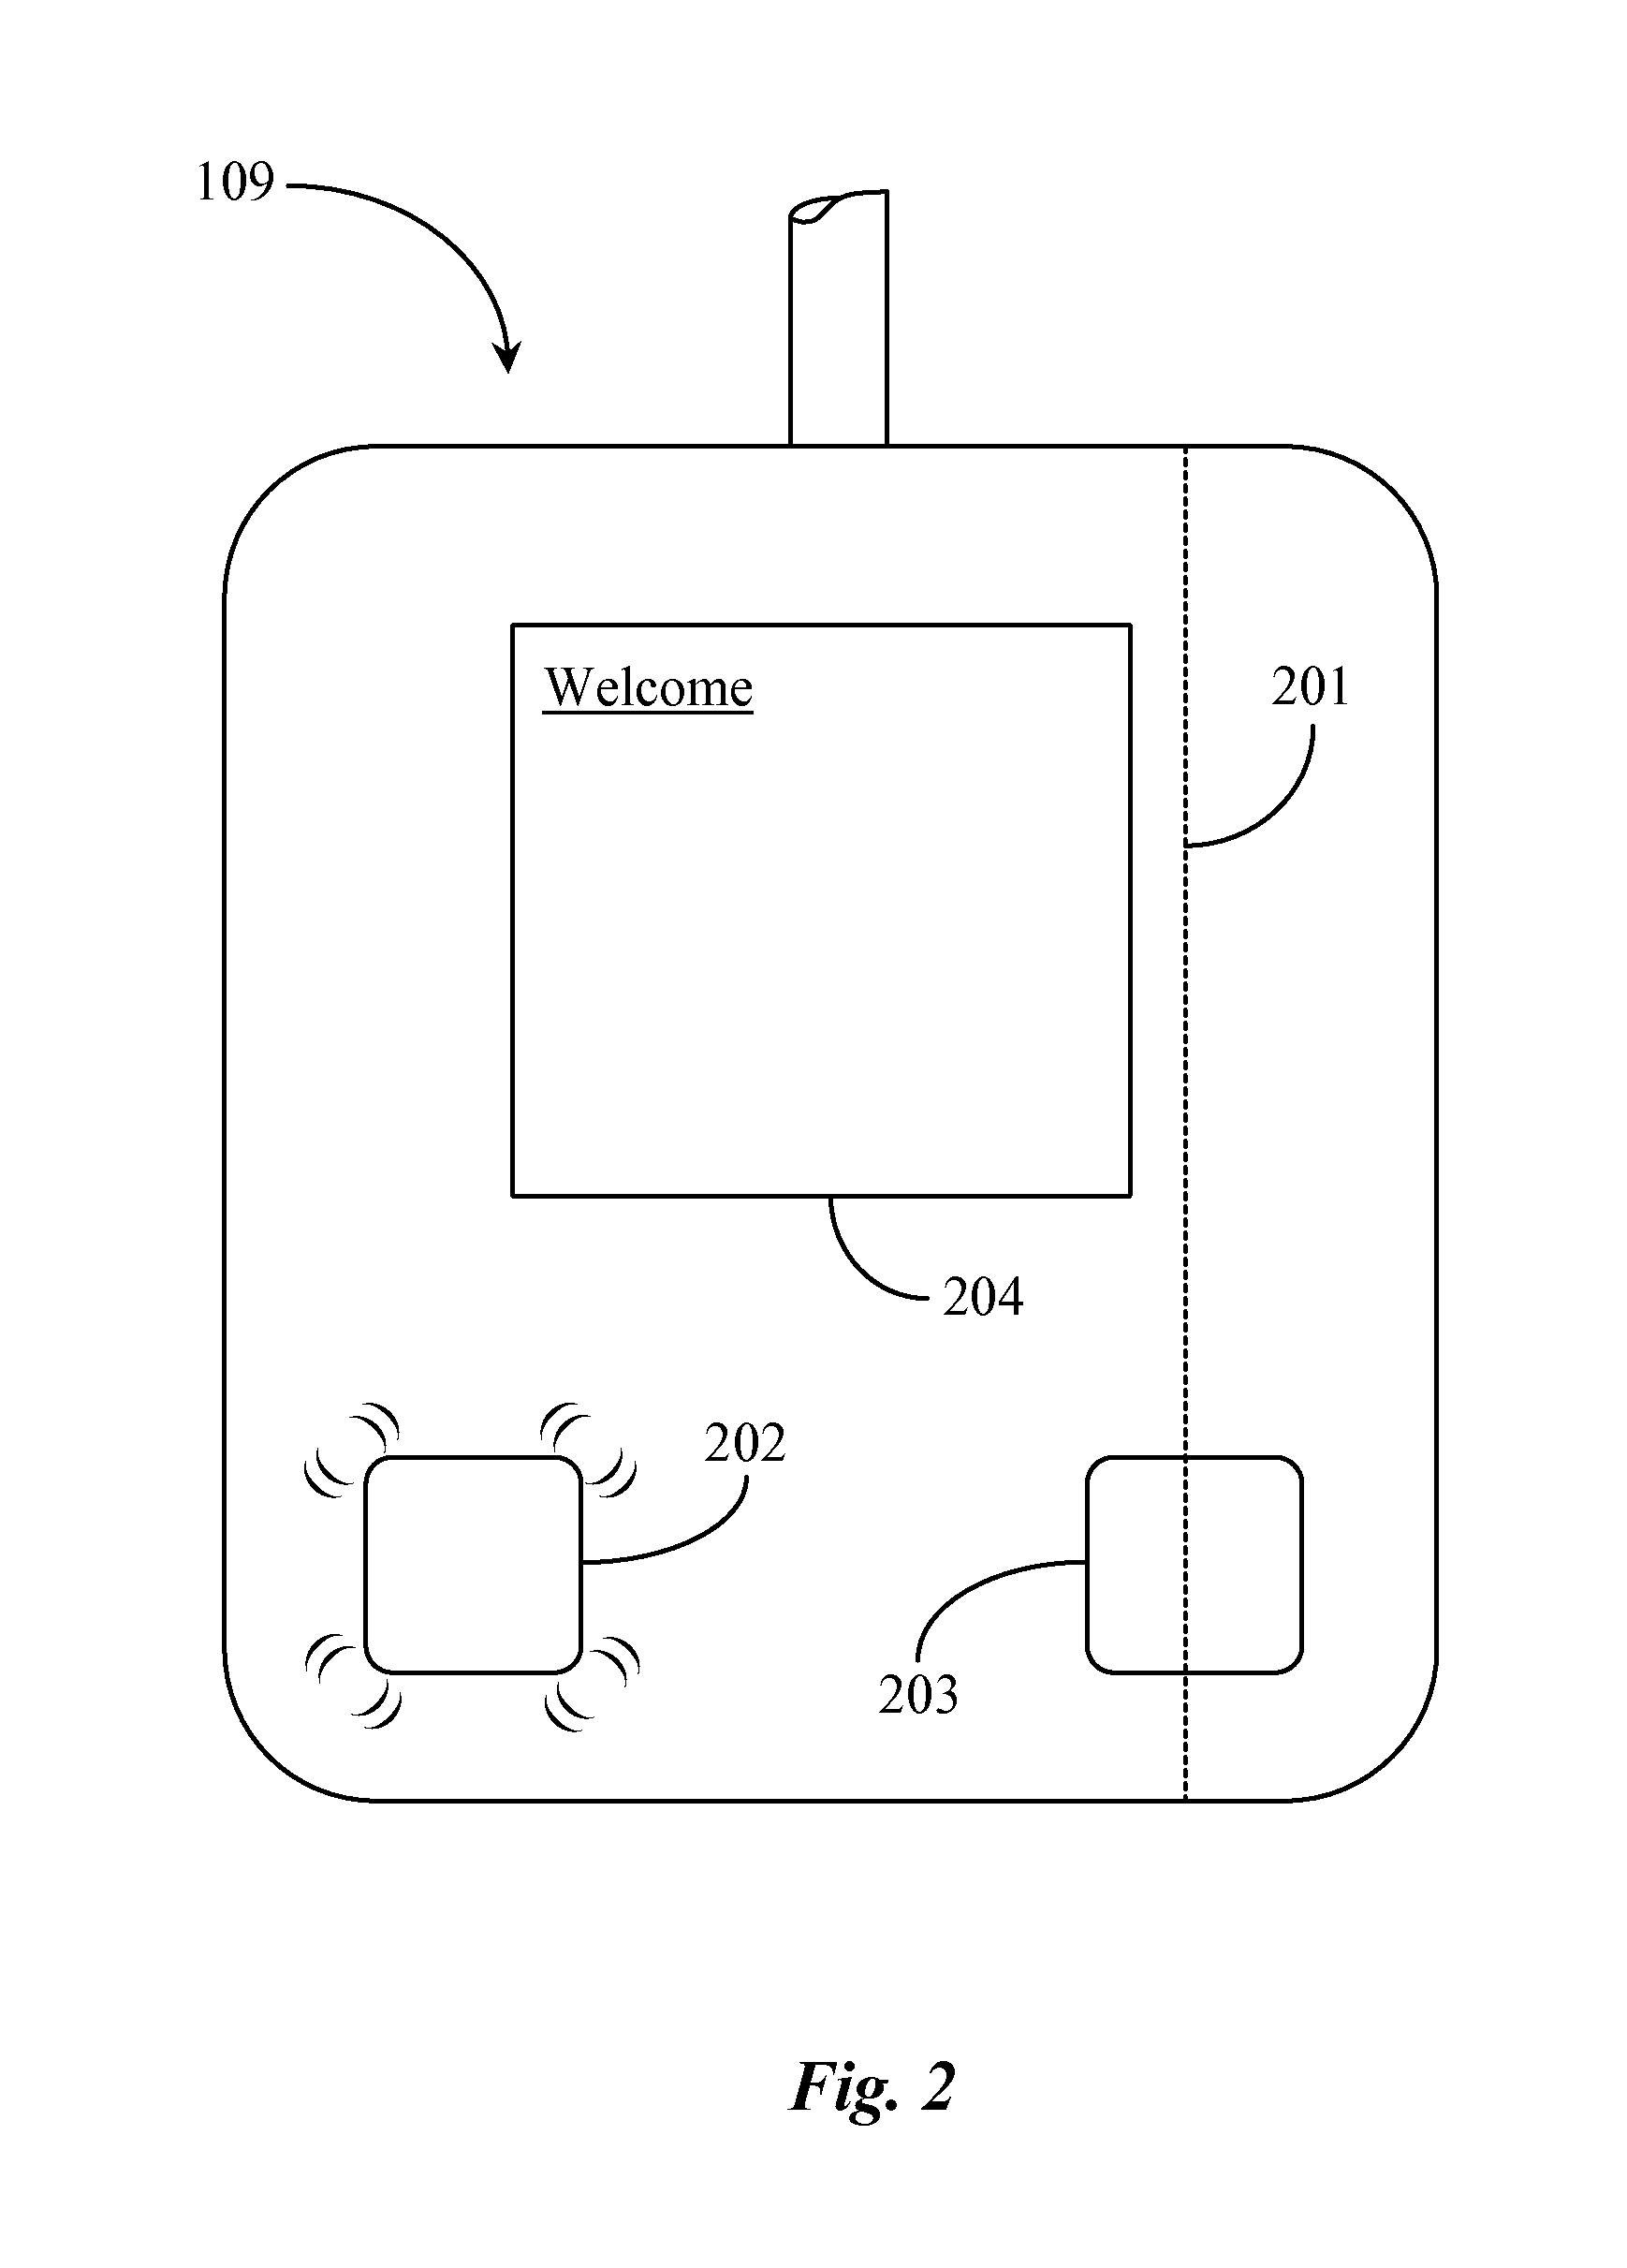 Electronic Transaction Record Distribution System